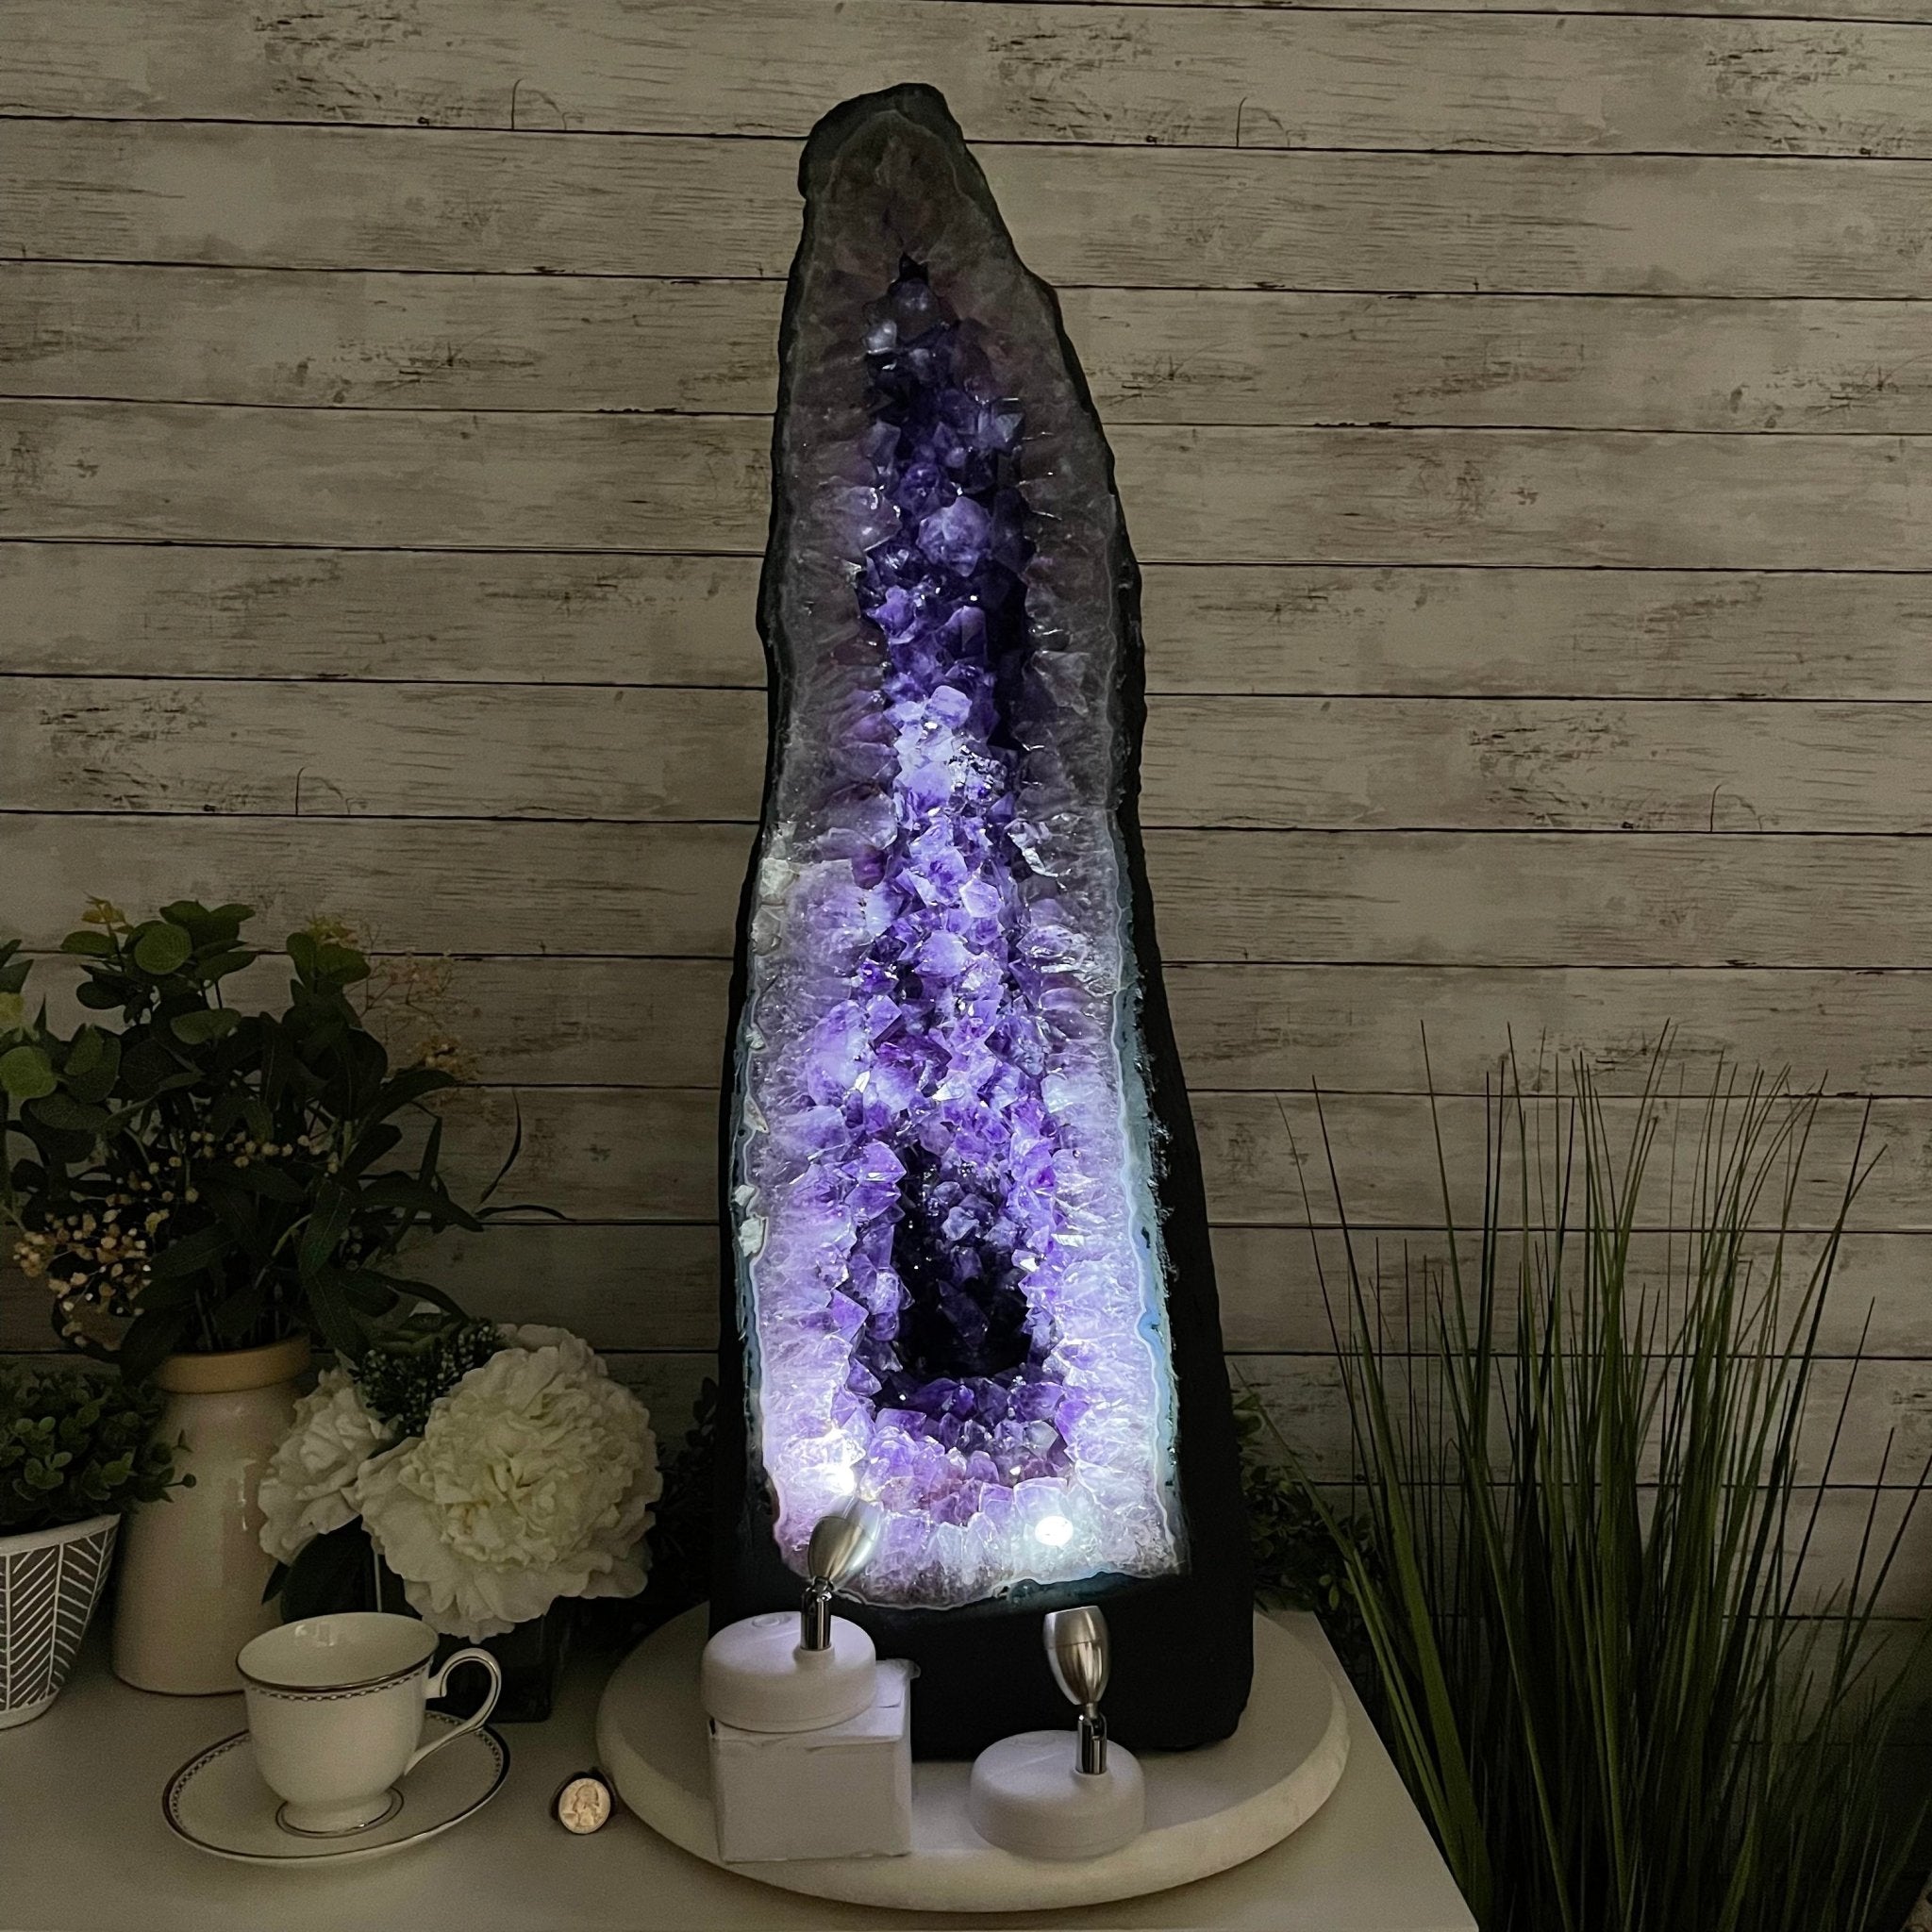 Extra Quality Brazilian Amethyst Cathedral, 125.7 lbs & 29.75" Tall #5601-0711 by Brazil Gems - Brazil GemsBrazil GemsExtra Quality Brazilian Amethyst Cathedral, 125.7 lbs & 29.75" Tall #5601-0711 by Brazil GemsCathedrals5601-0711